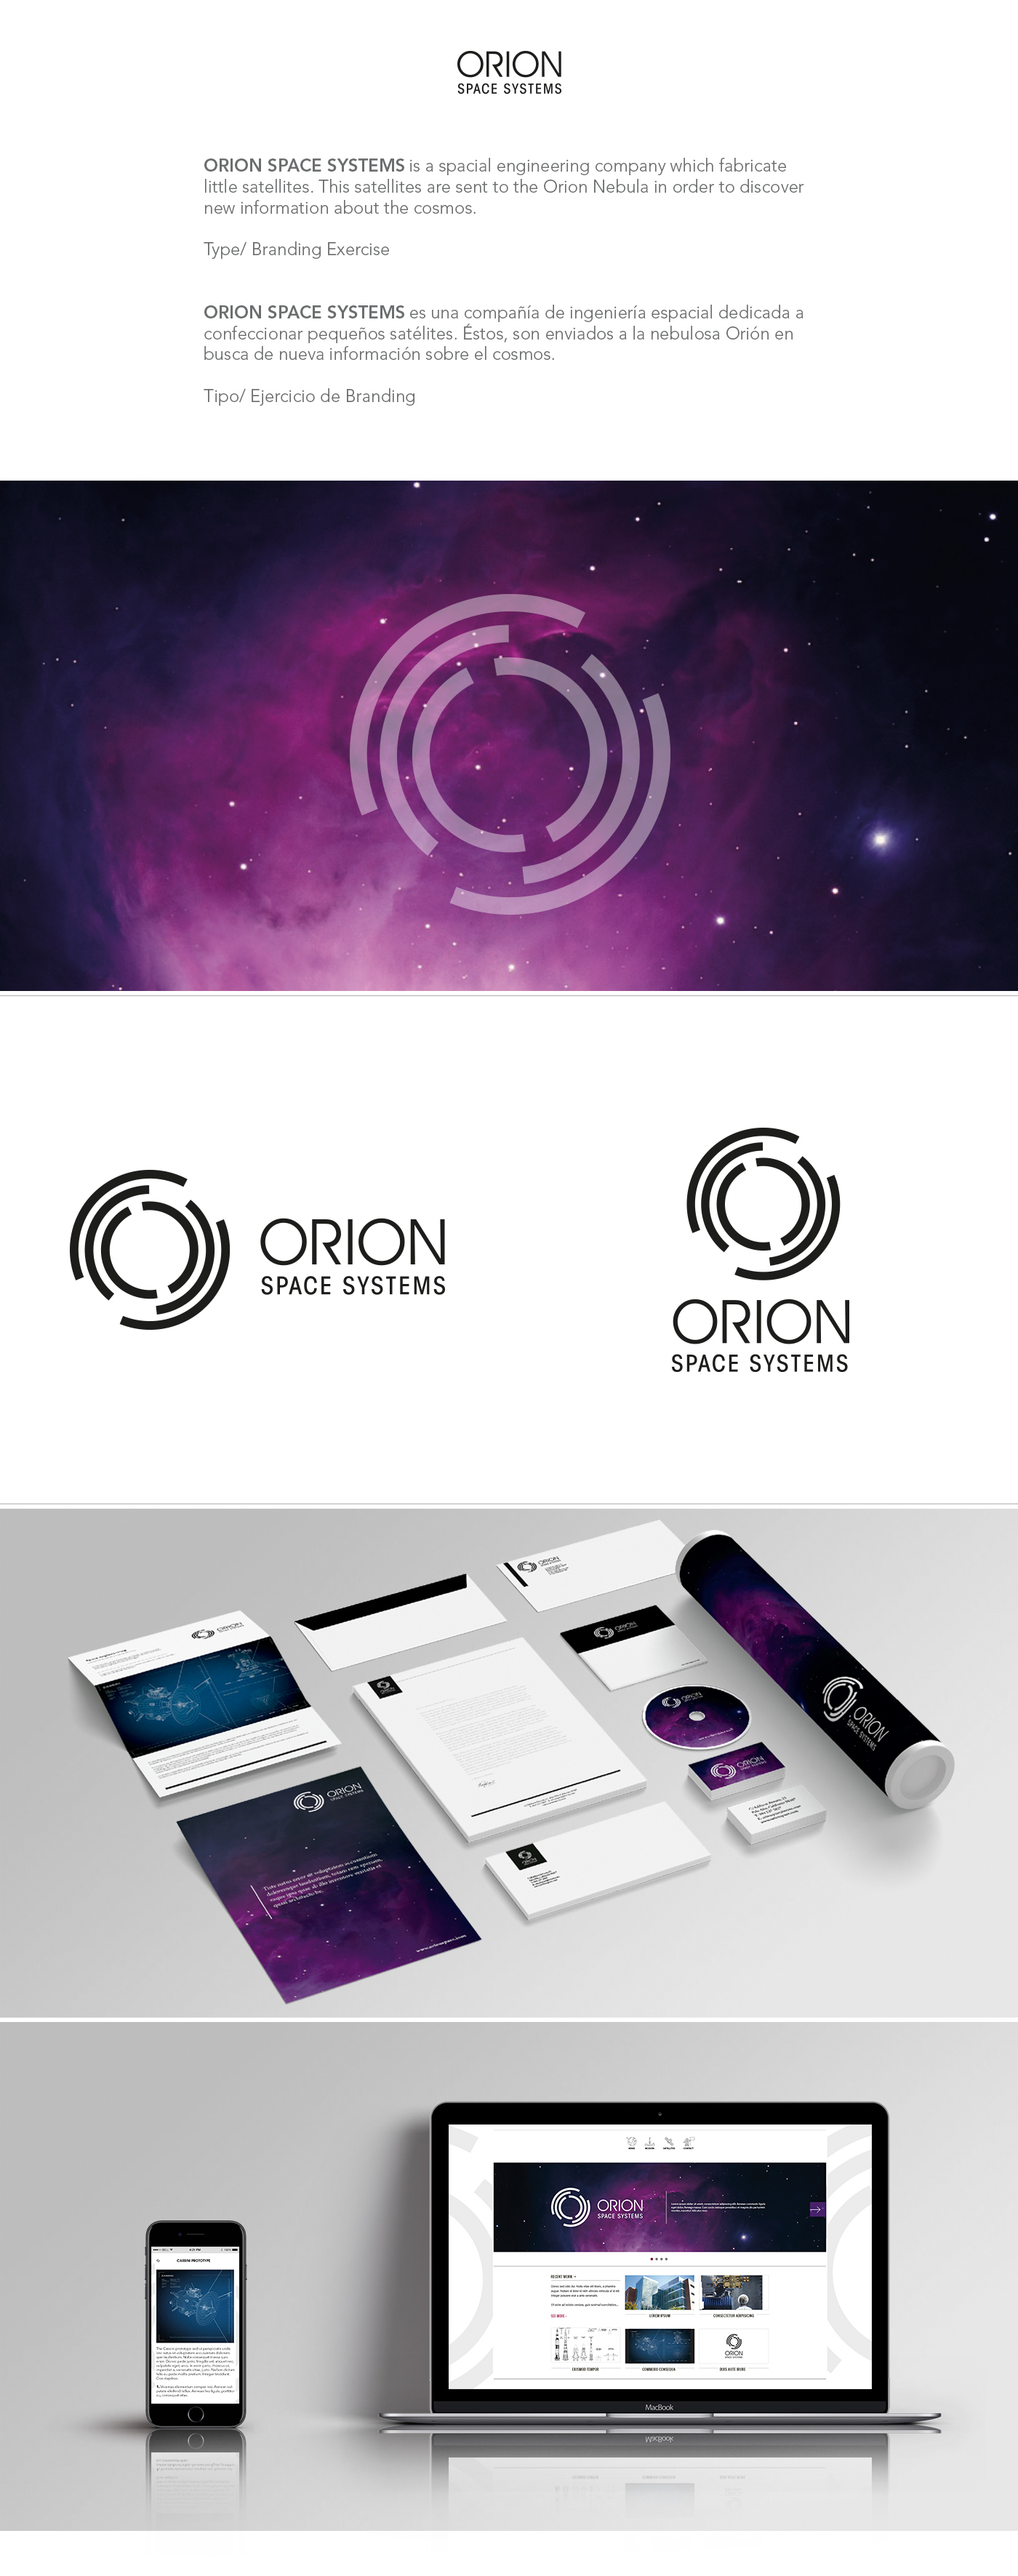 branding  visual identity graphic design  Space  orion system